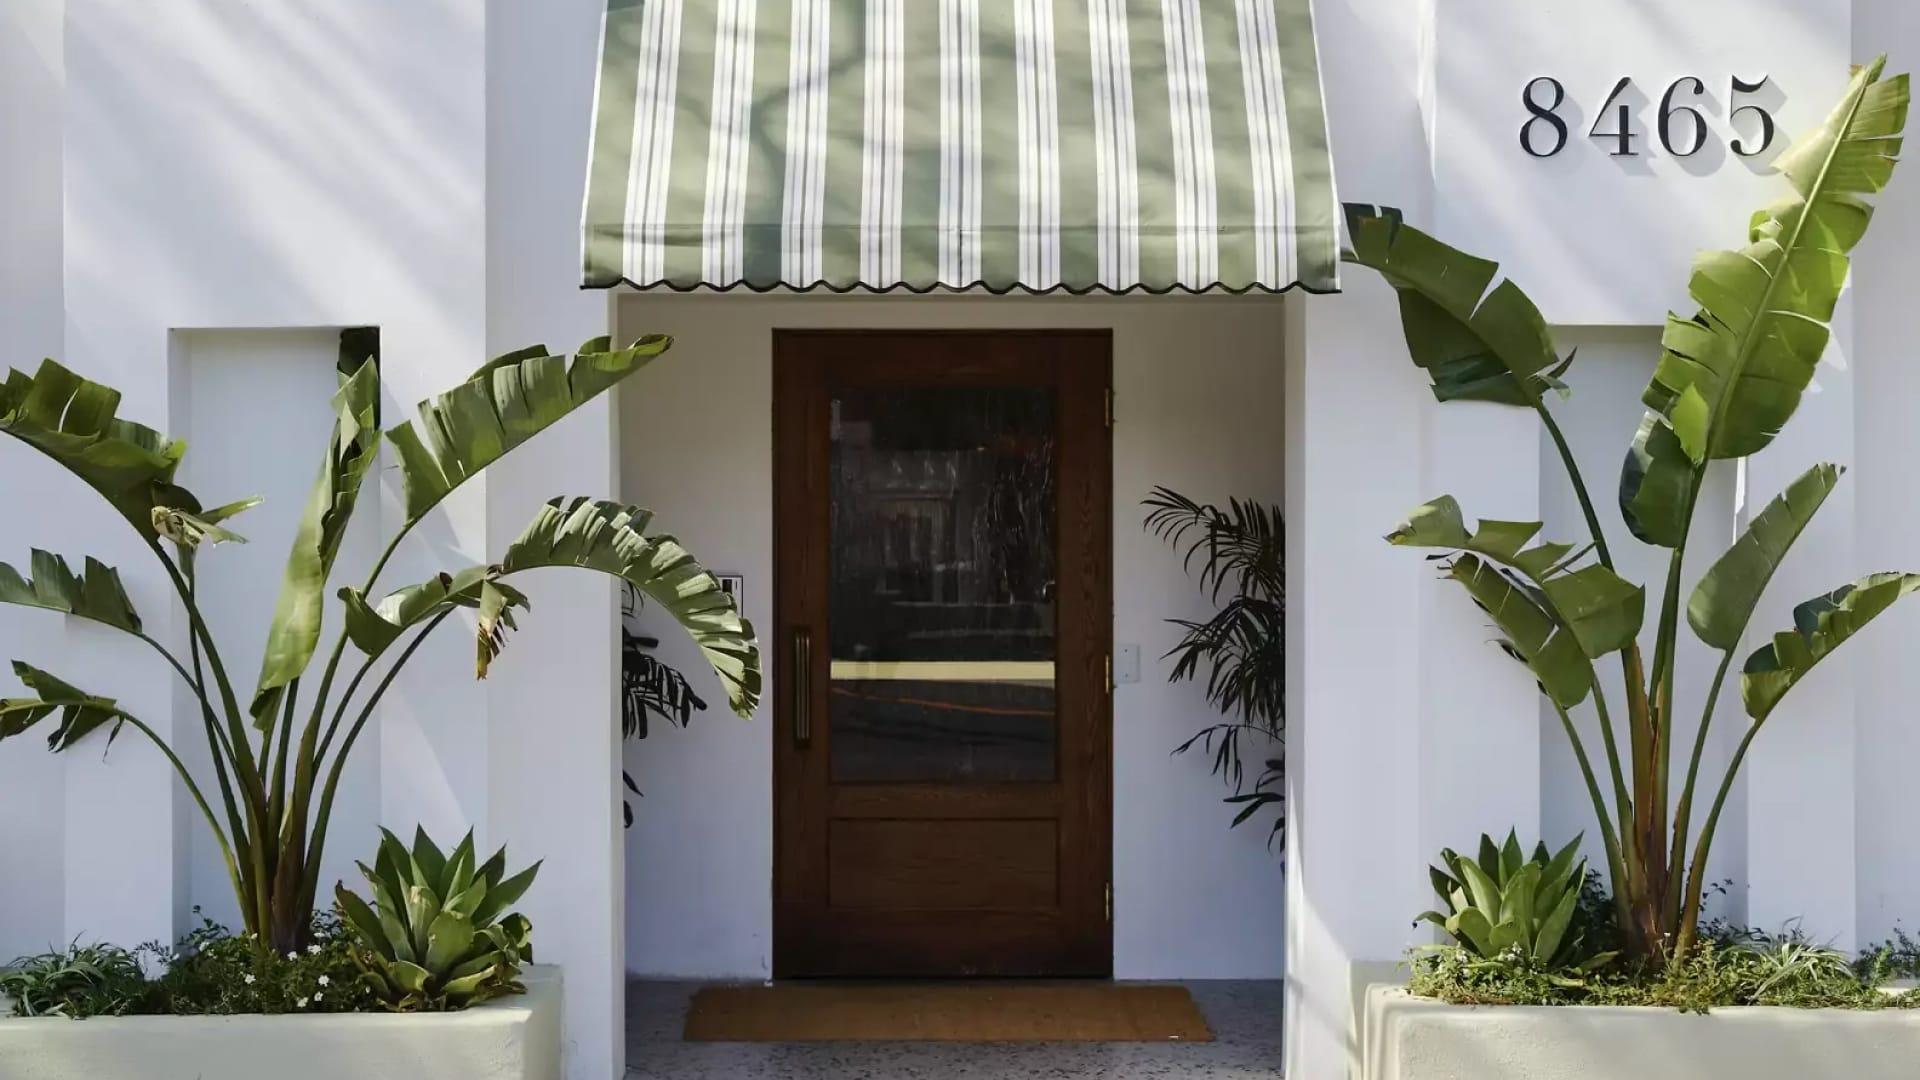 Photography of LA's Soho House Holloway. The image depicts a white building with a central brown front door. On either side of the door are two green palm trees, and the top of the door features a green and white door cover.